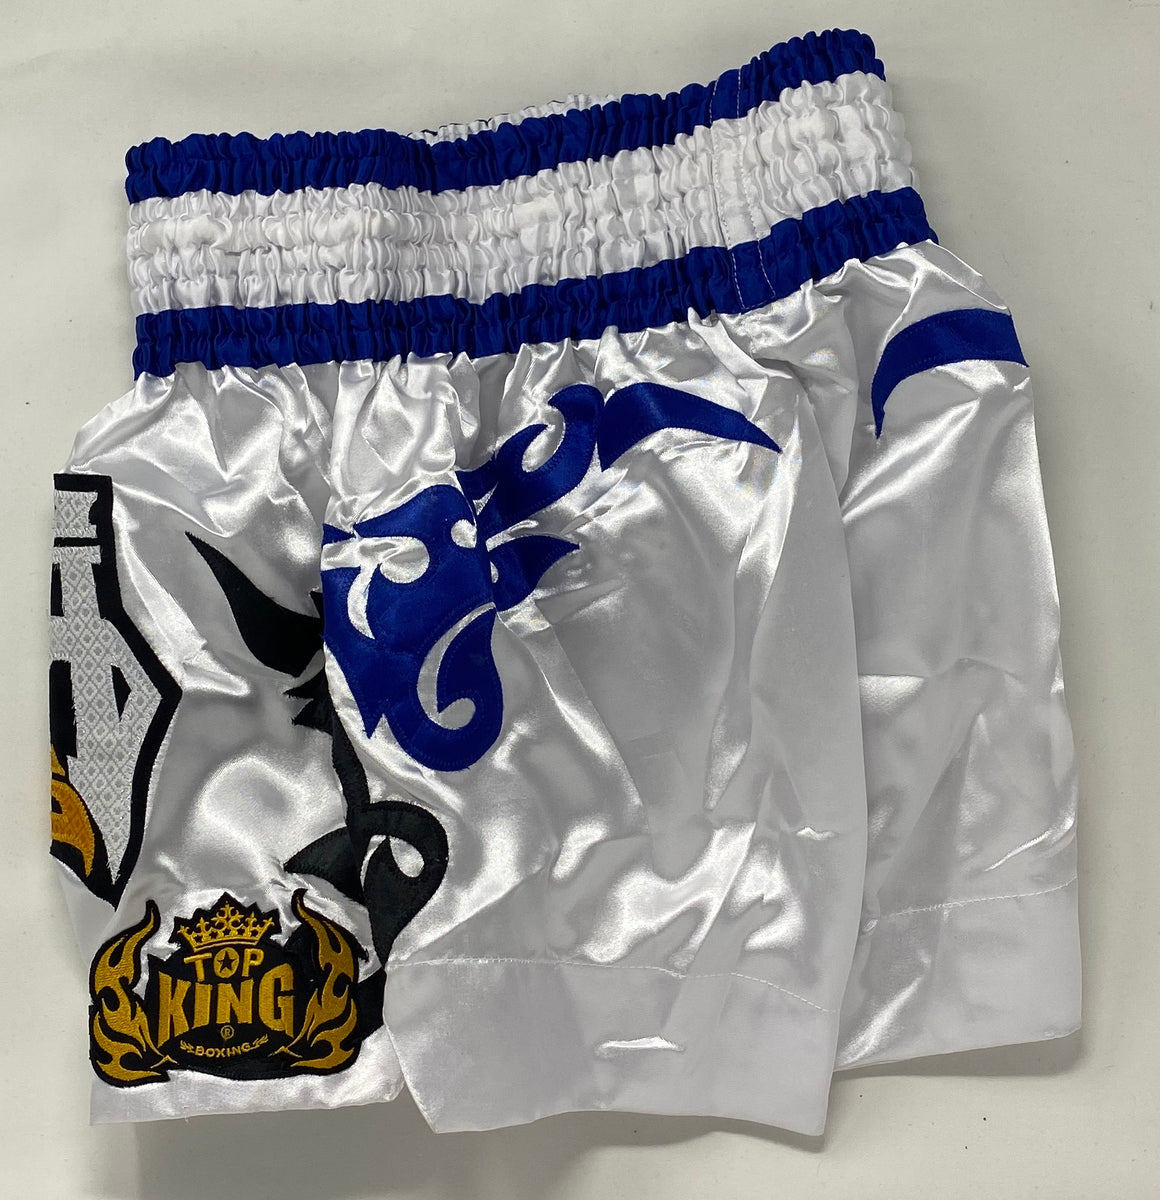 Top King Muay Thai Boxing Shorts TKTBS-109, affordable and direct from  Thailand